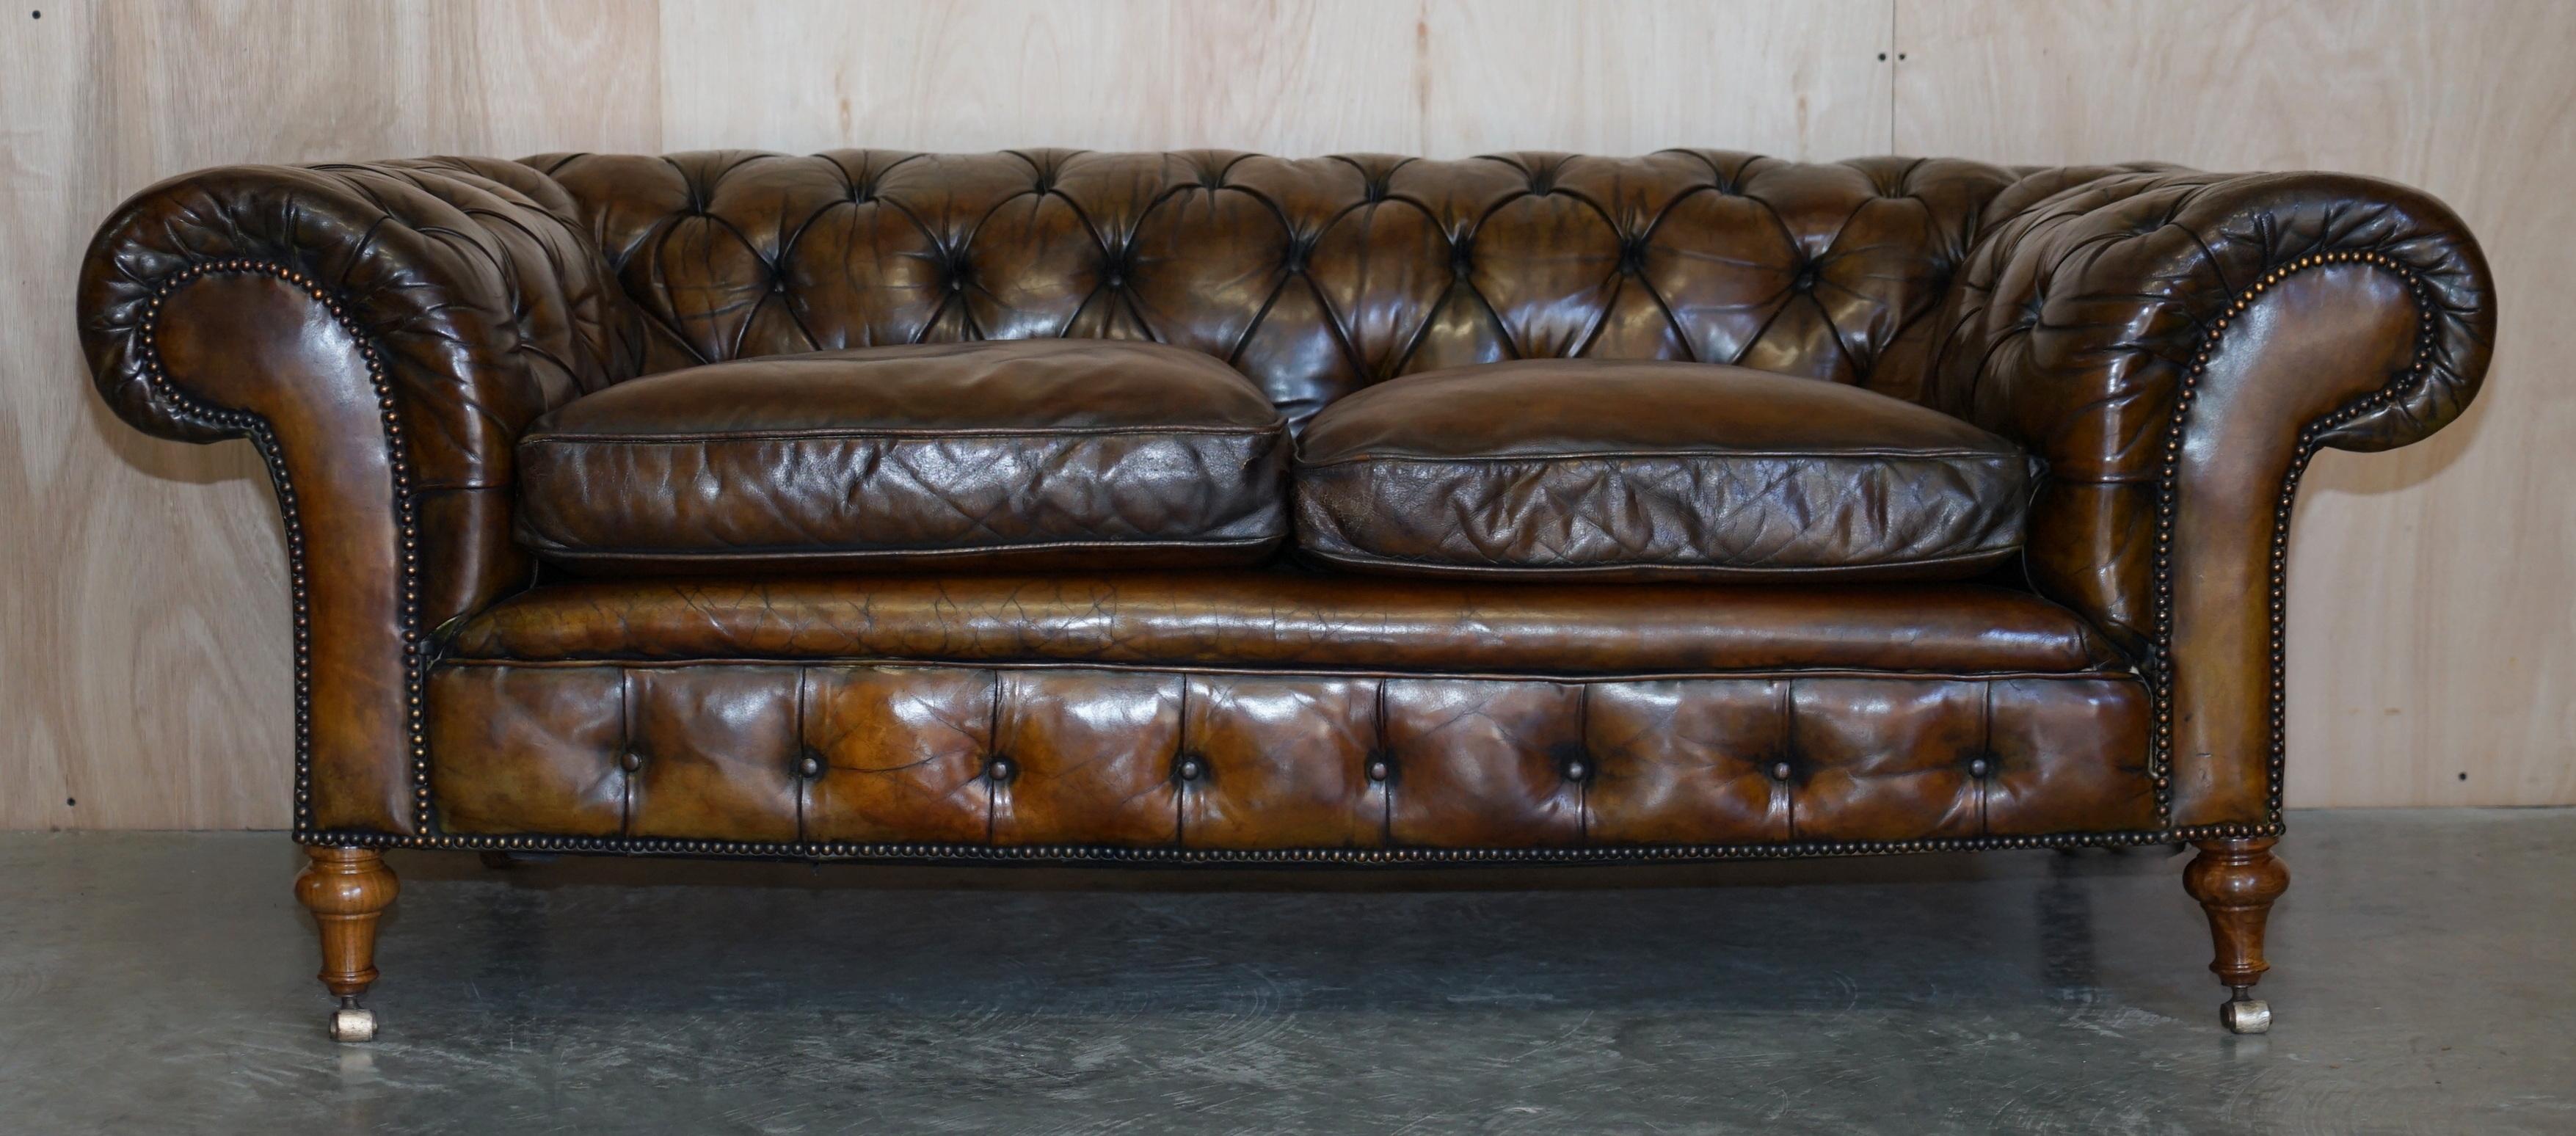 We are delighted to offer for sale this stunning fully restored Victorian hand dyed cigar brown leather Chesterfield tufted club sofa with feather filled cushions and super rare one of a kind Rosewood turned legs with super brass castors.

I have